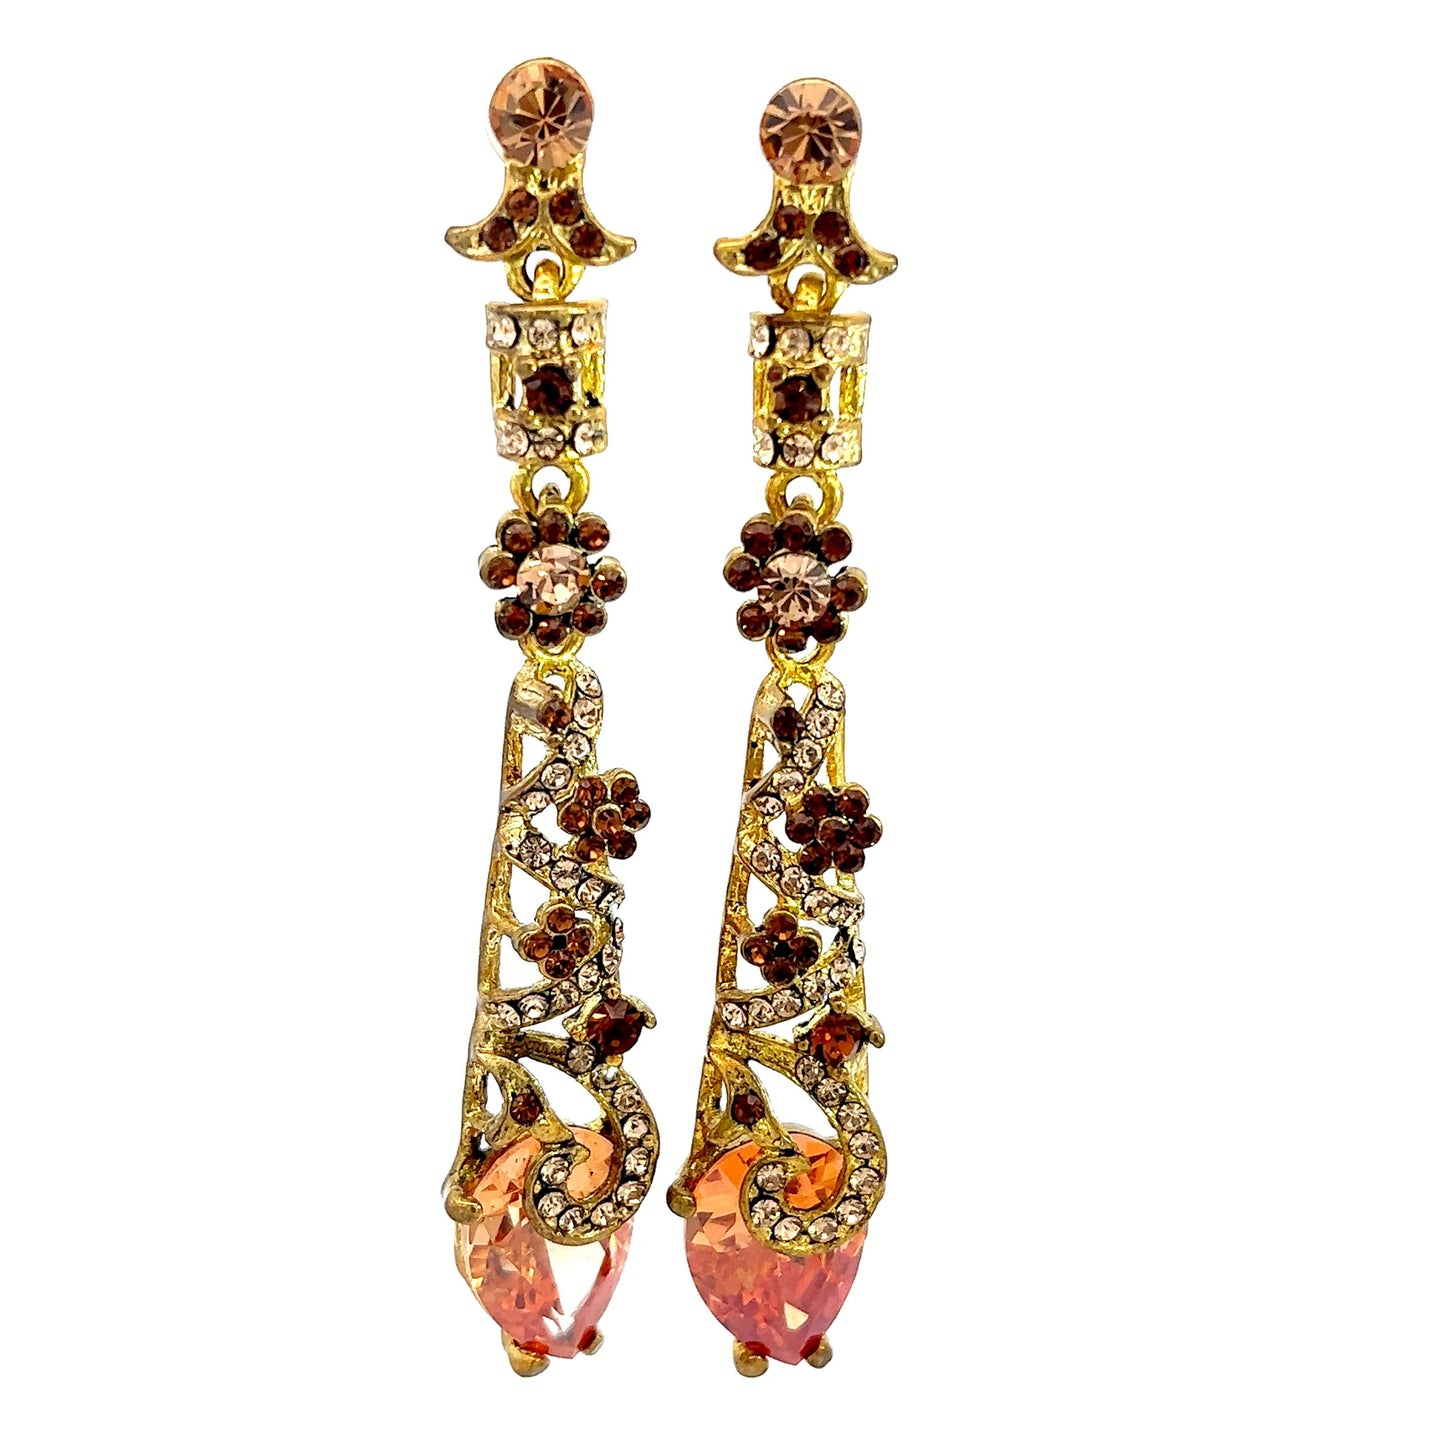 Champagne Crystal & Gold CZ Drop Earrings - Born To Glam